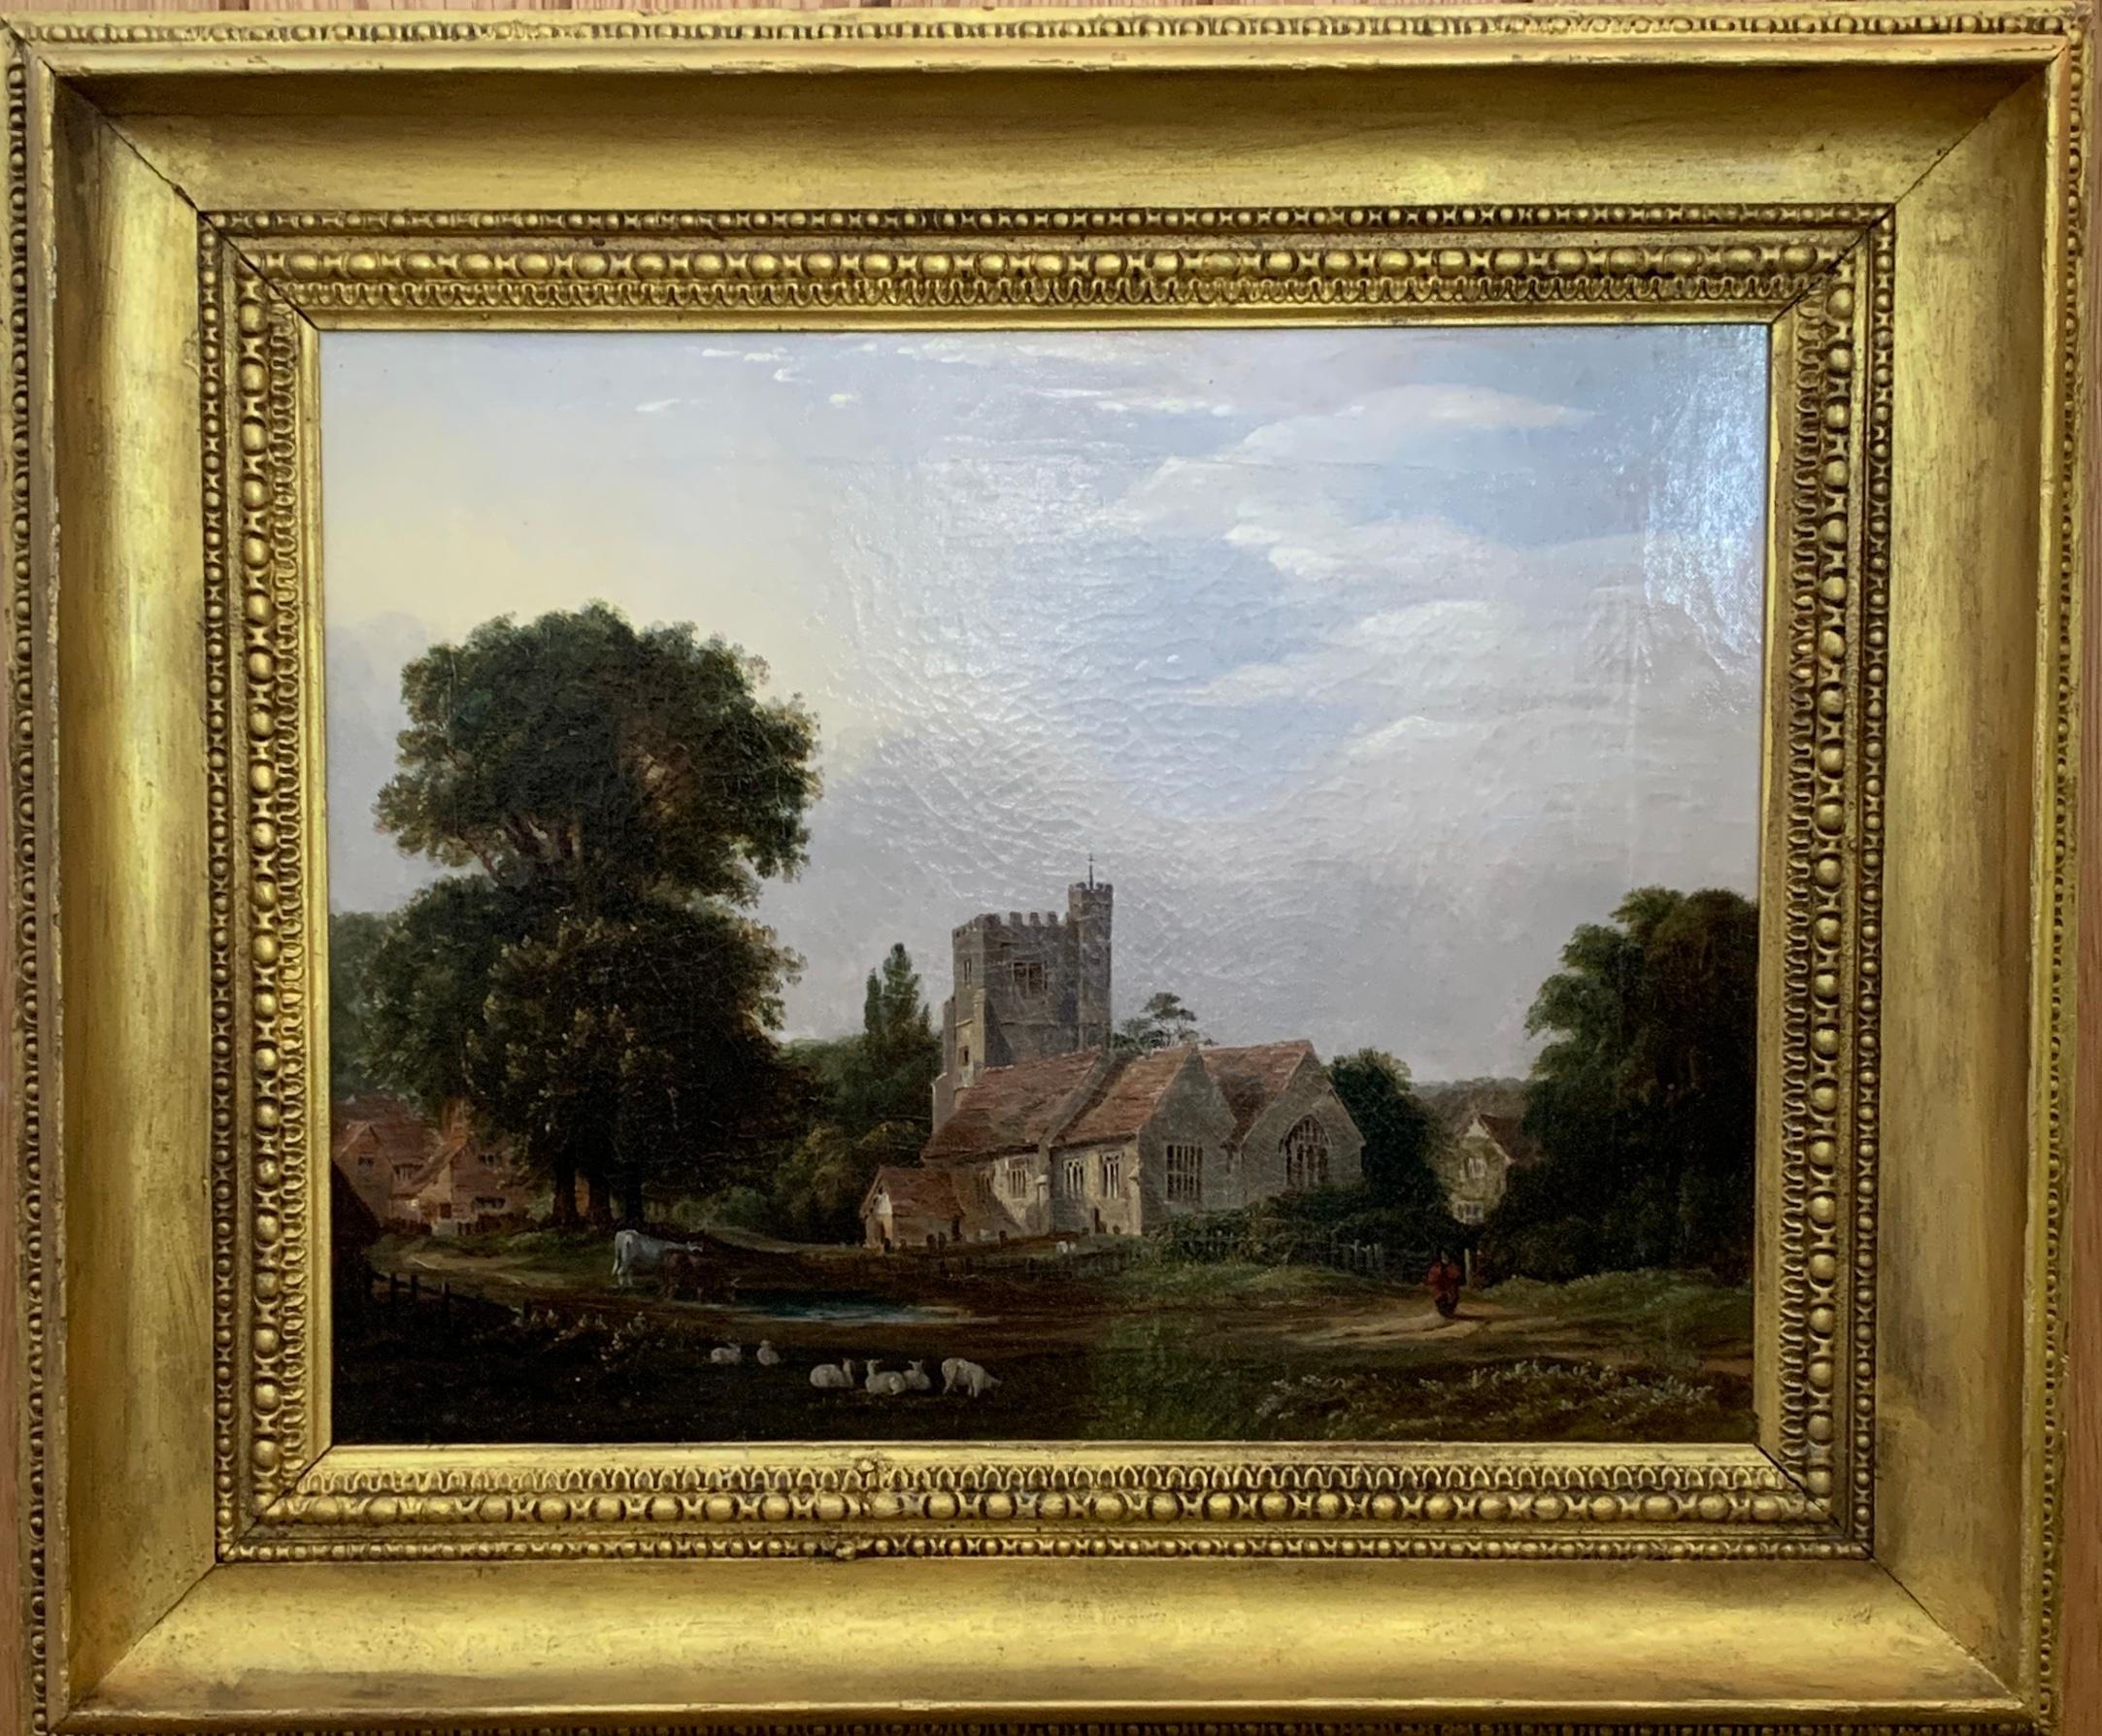 J.Danburg Figurative Painting - English 19th century Victorian landscape with a Norman Church , sheep and figures